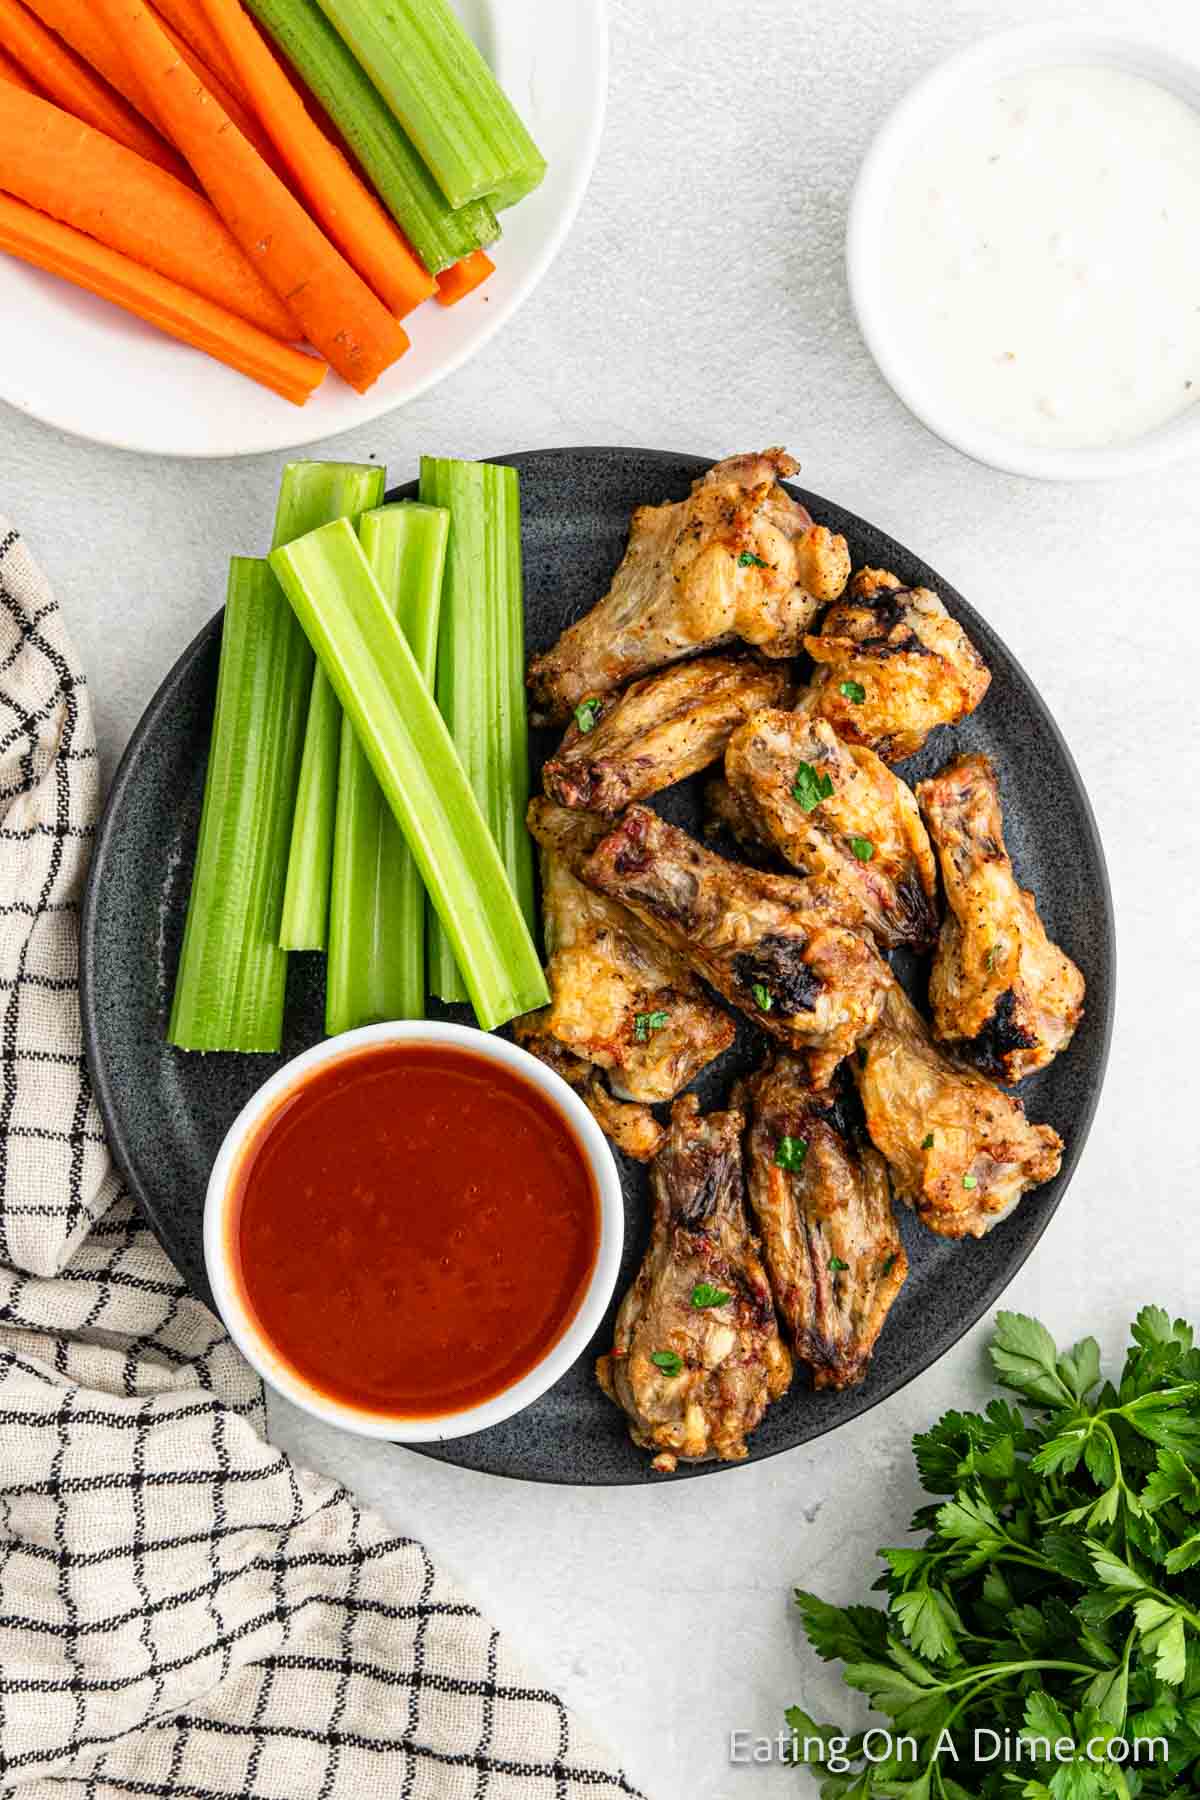 Chicken wings on a plate with celery sticks and a bowl of buffalo sauce